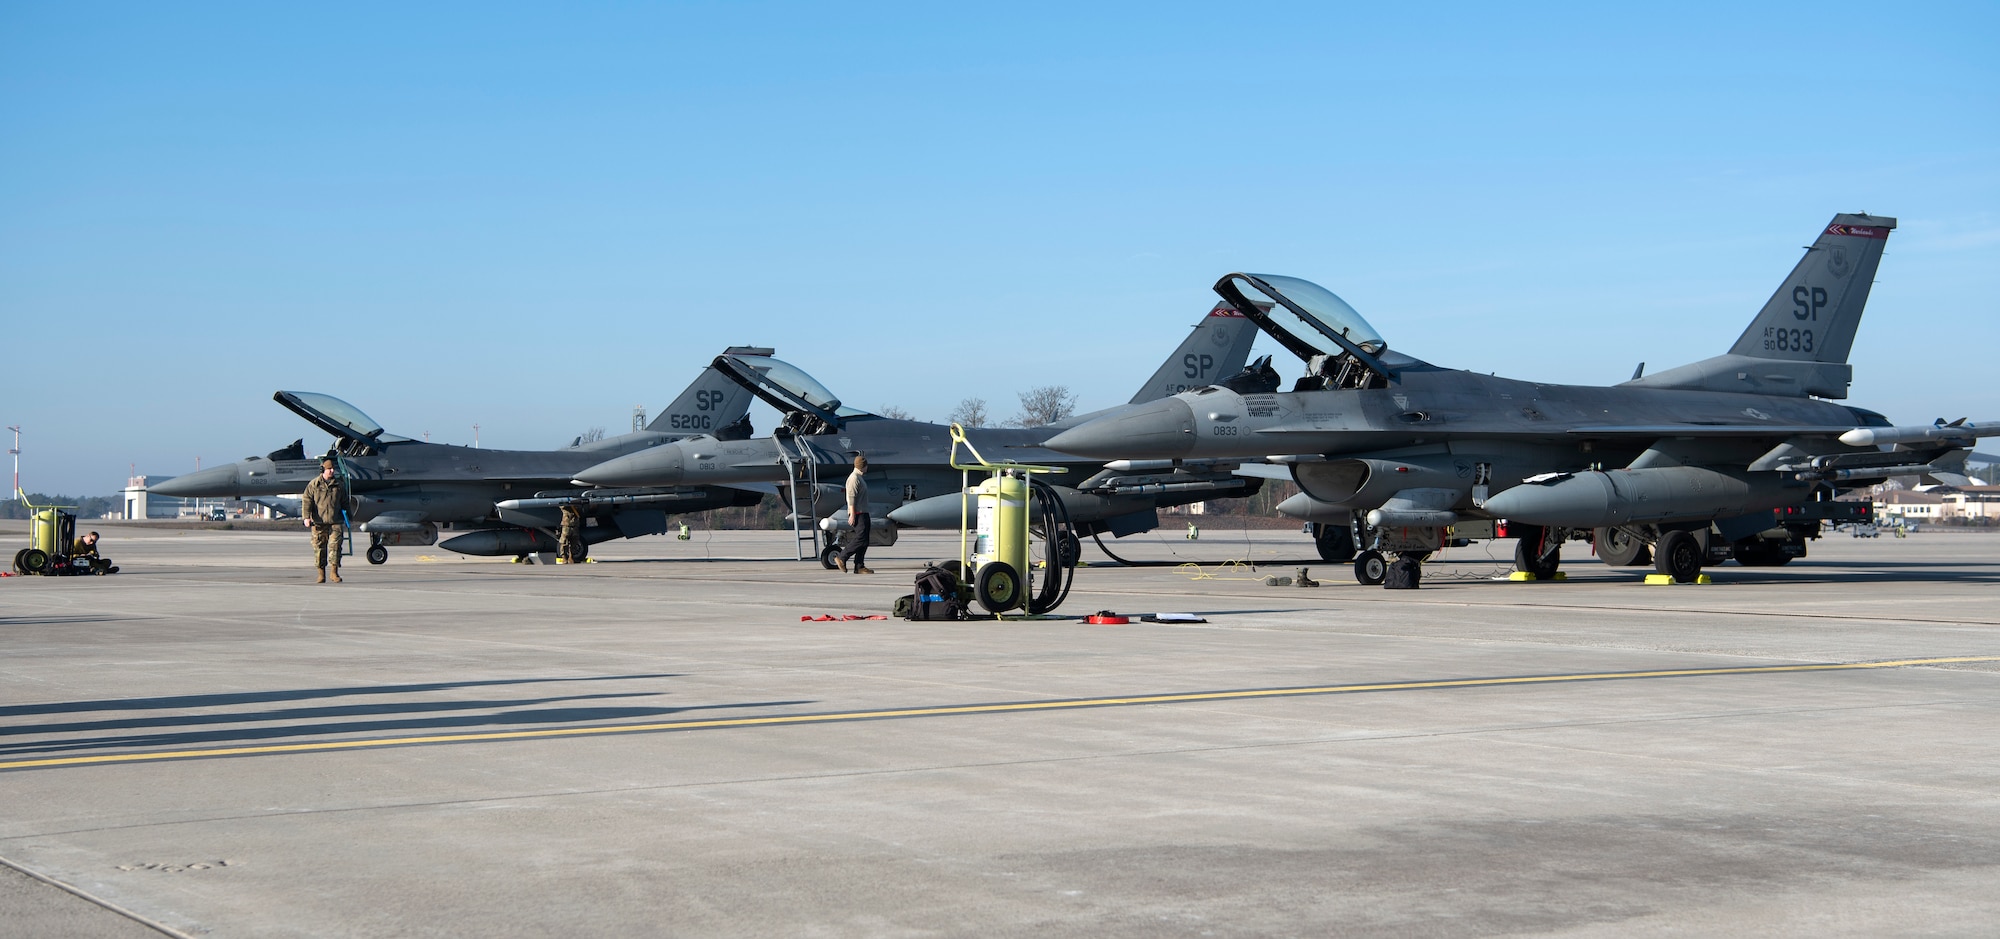 U.S. Airmen from the 52nd Fighter Wing finish fueling and arming F-16 Fighting Falcons on the flightline at Ramstein Air Base, Germany, Jan. 22, 2020. The effort was in support of an Agile Combat Employment Exercise. The goal of ACE is to generate airpower in any environment with minimal personnel and equipment, and deter threats. (U.S. Air Force photo by Airman 1st Class Valerie Seelye)